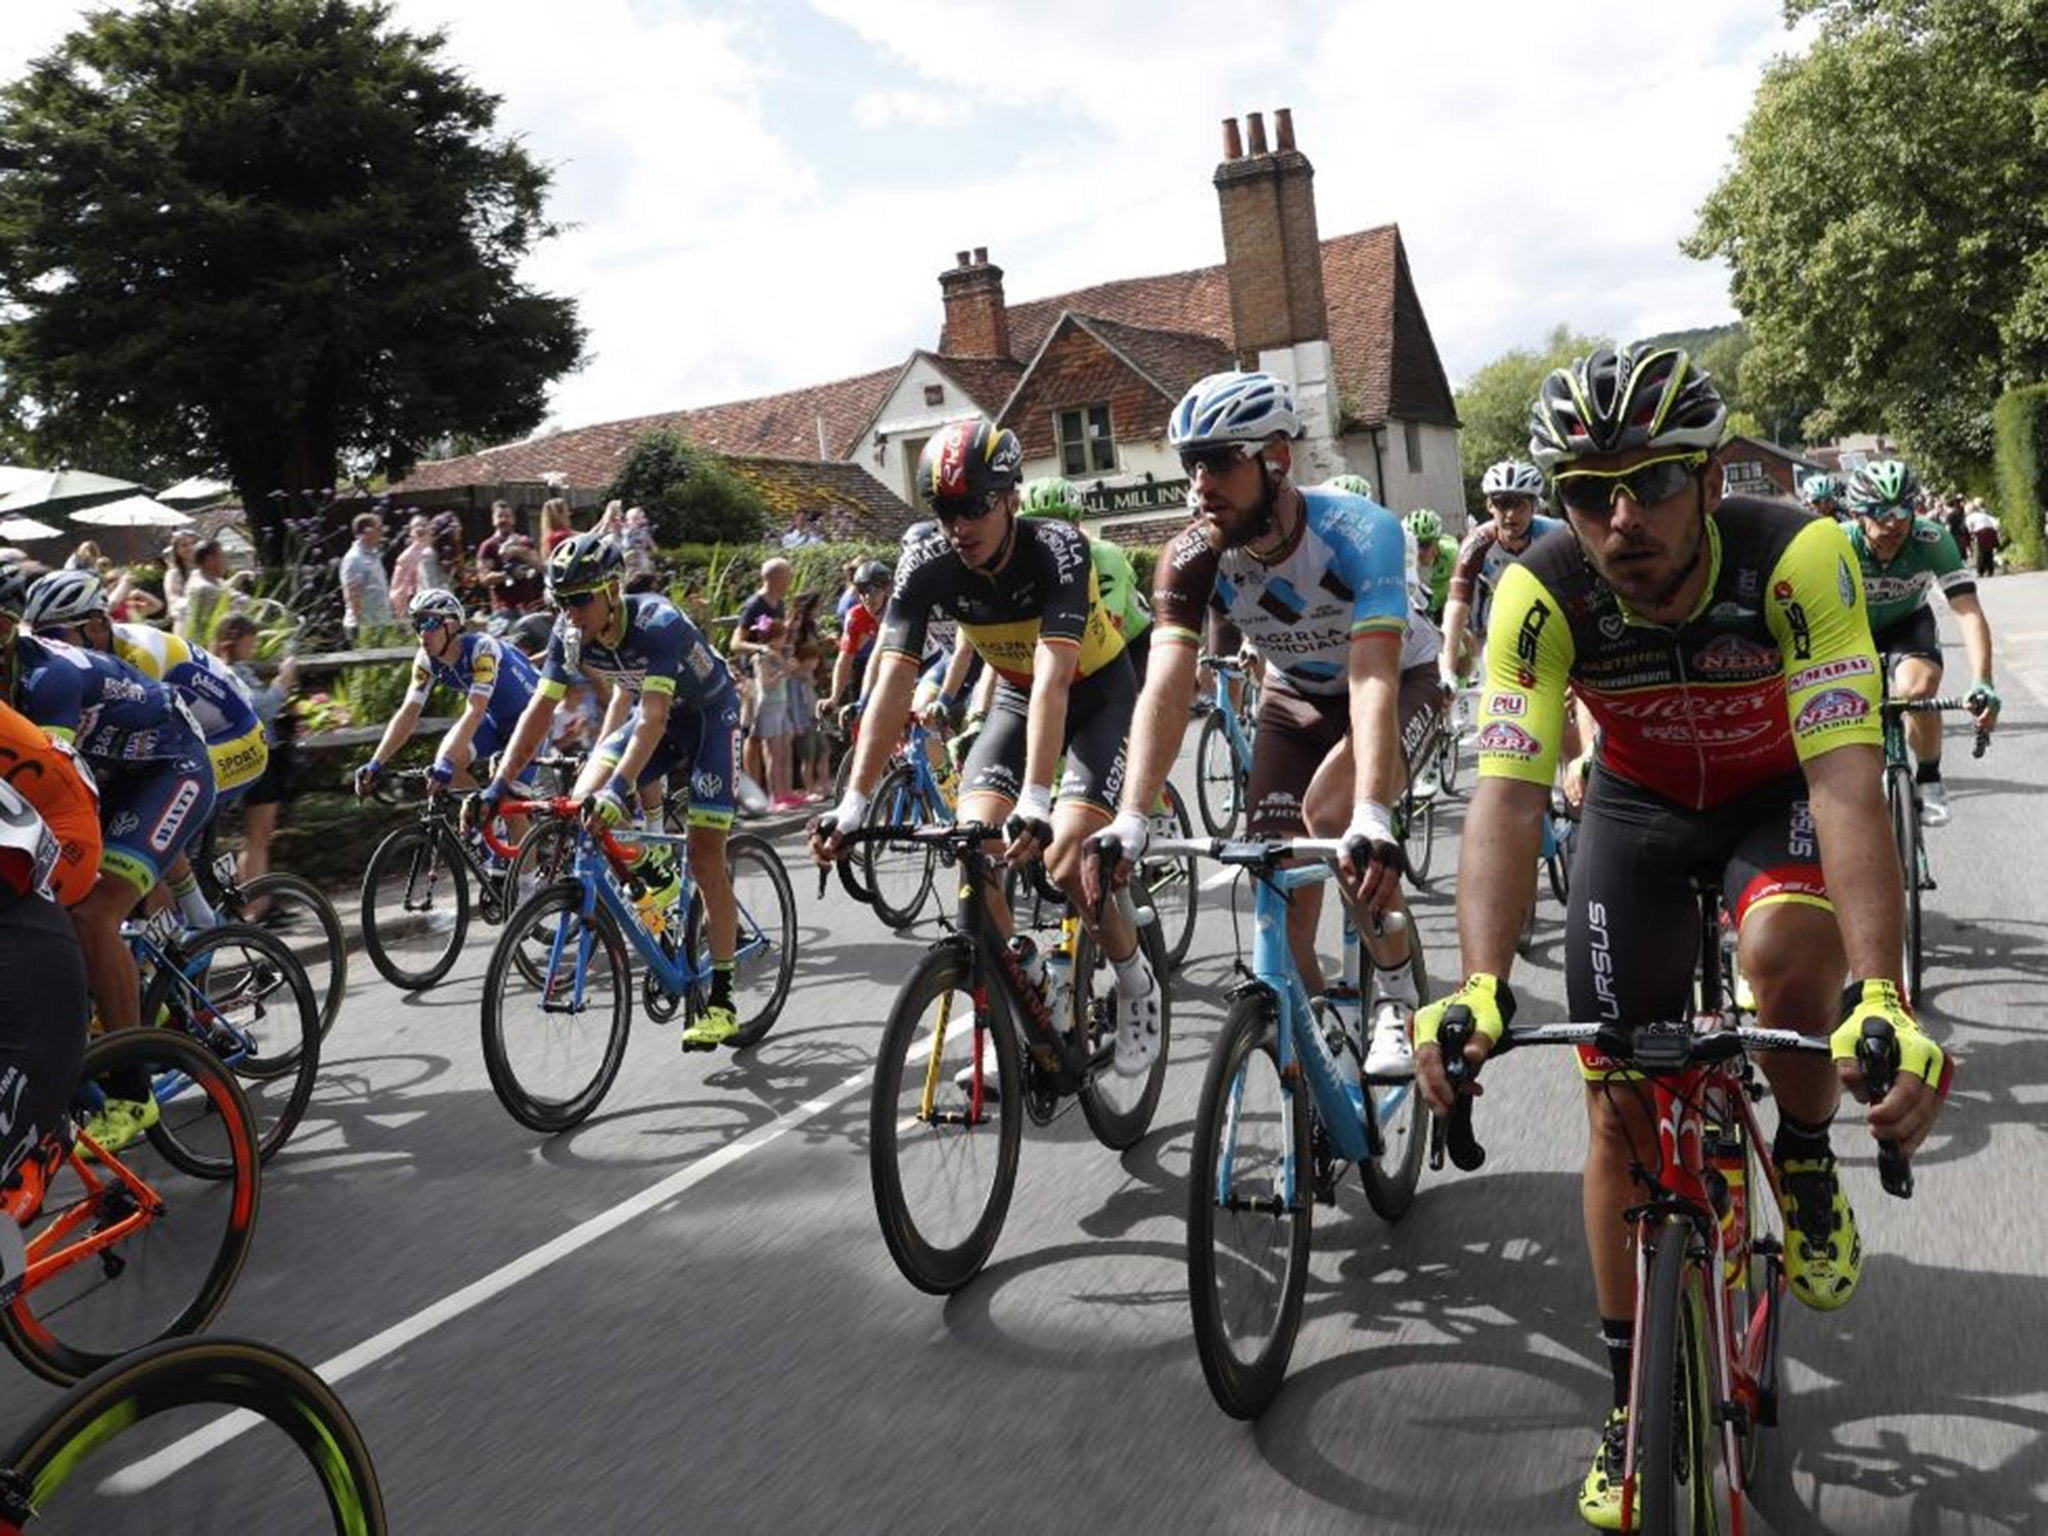 RideLondon riders cycling through a Surrey village on the route